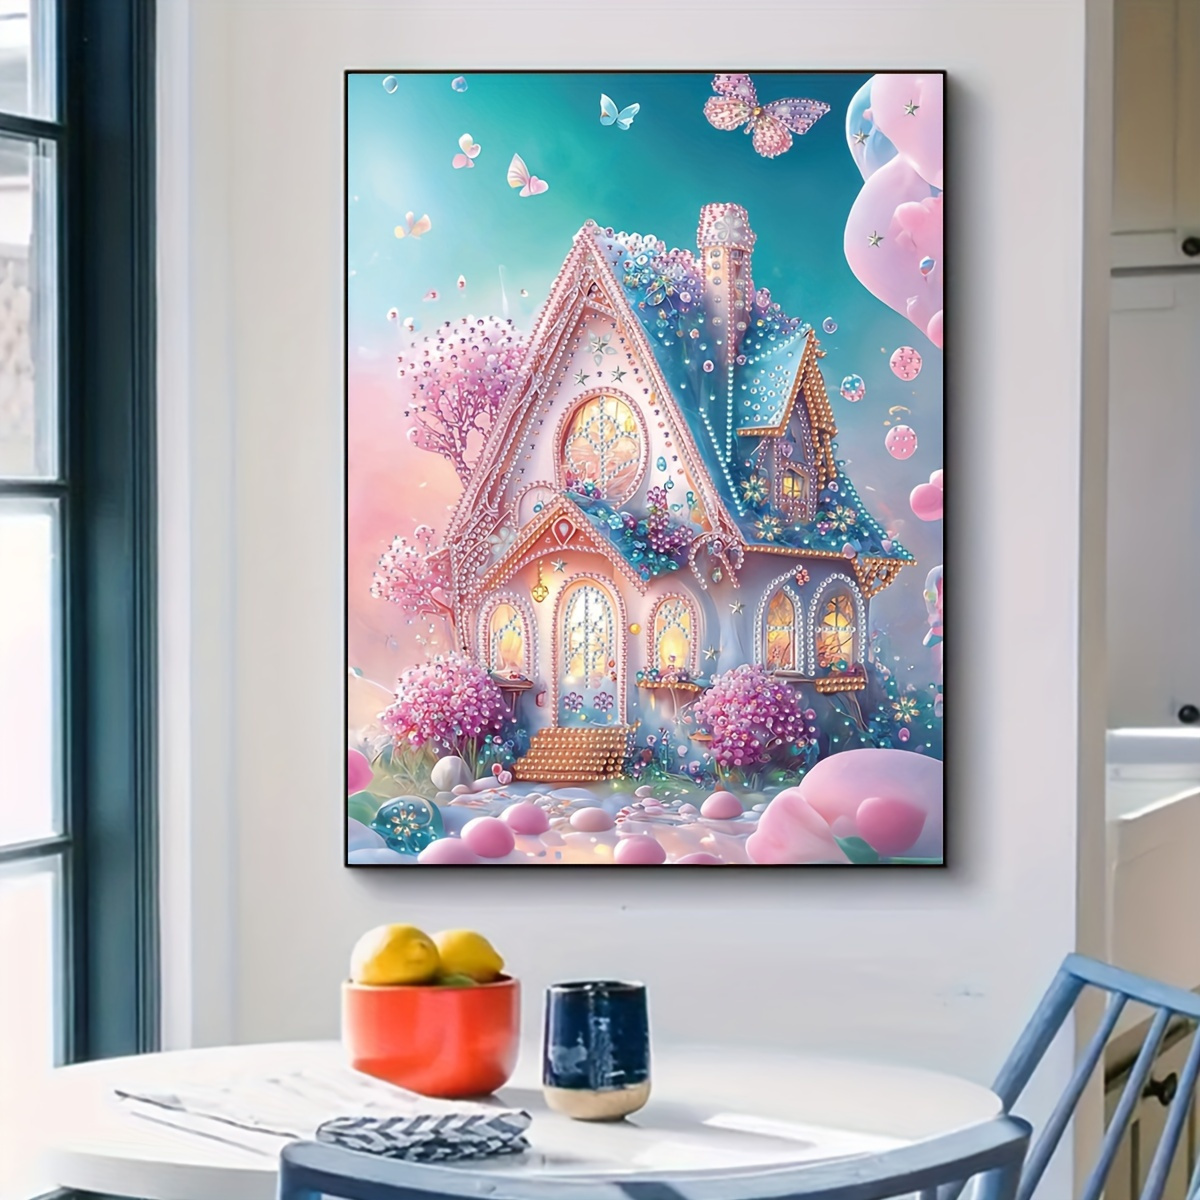 

1pc Fairy Tale Cabin Landscape Diamond Painting Kit, 5d Diy Special Shape Crystal Local Diamond Painting Craft, Suitable For Home Wall Decoration Art.